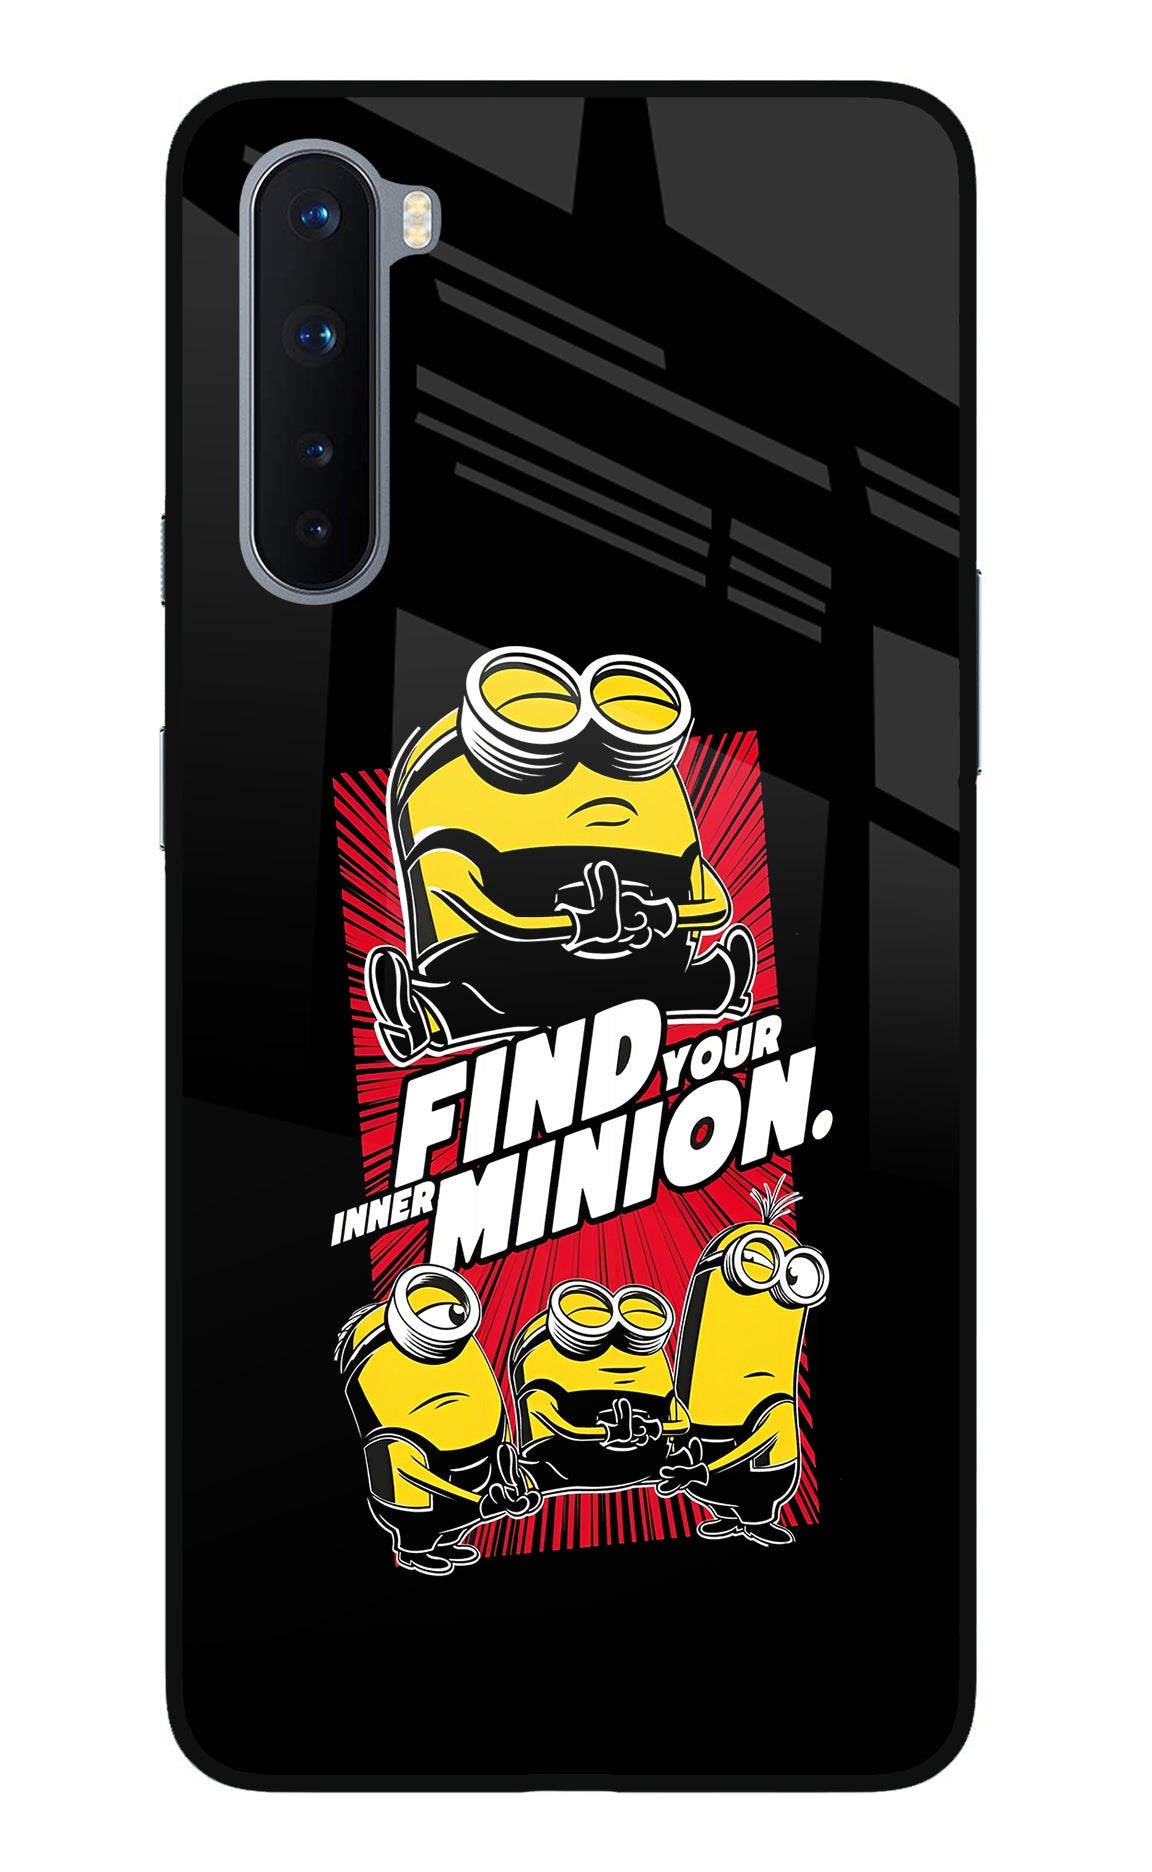 Find your inner Minion Oneplus Nord Glass Case